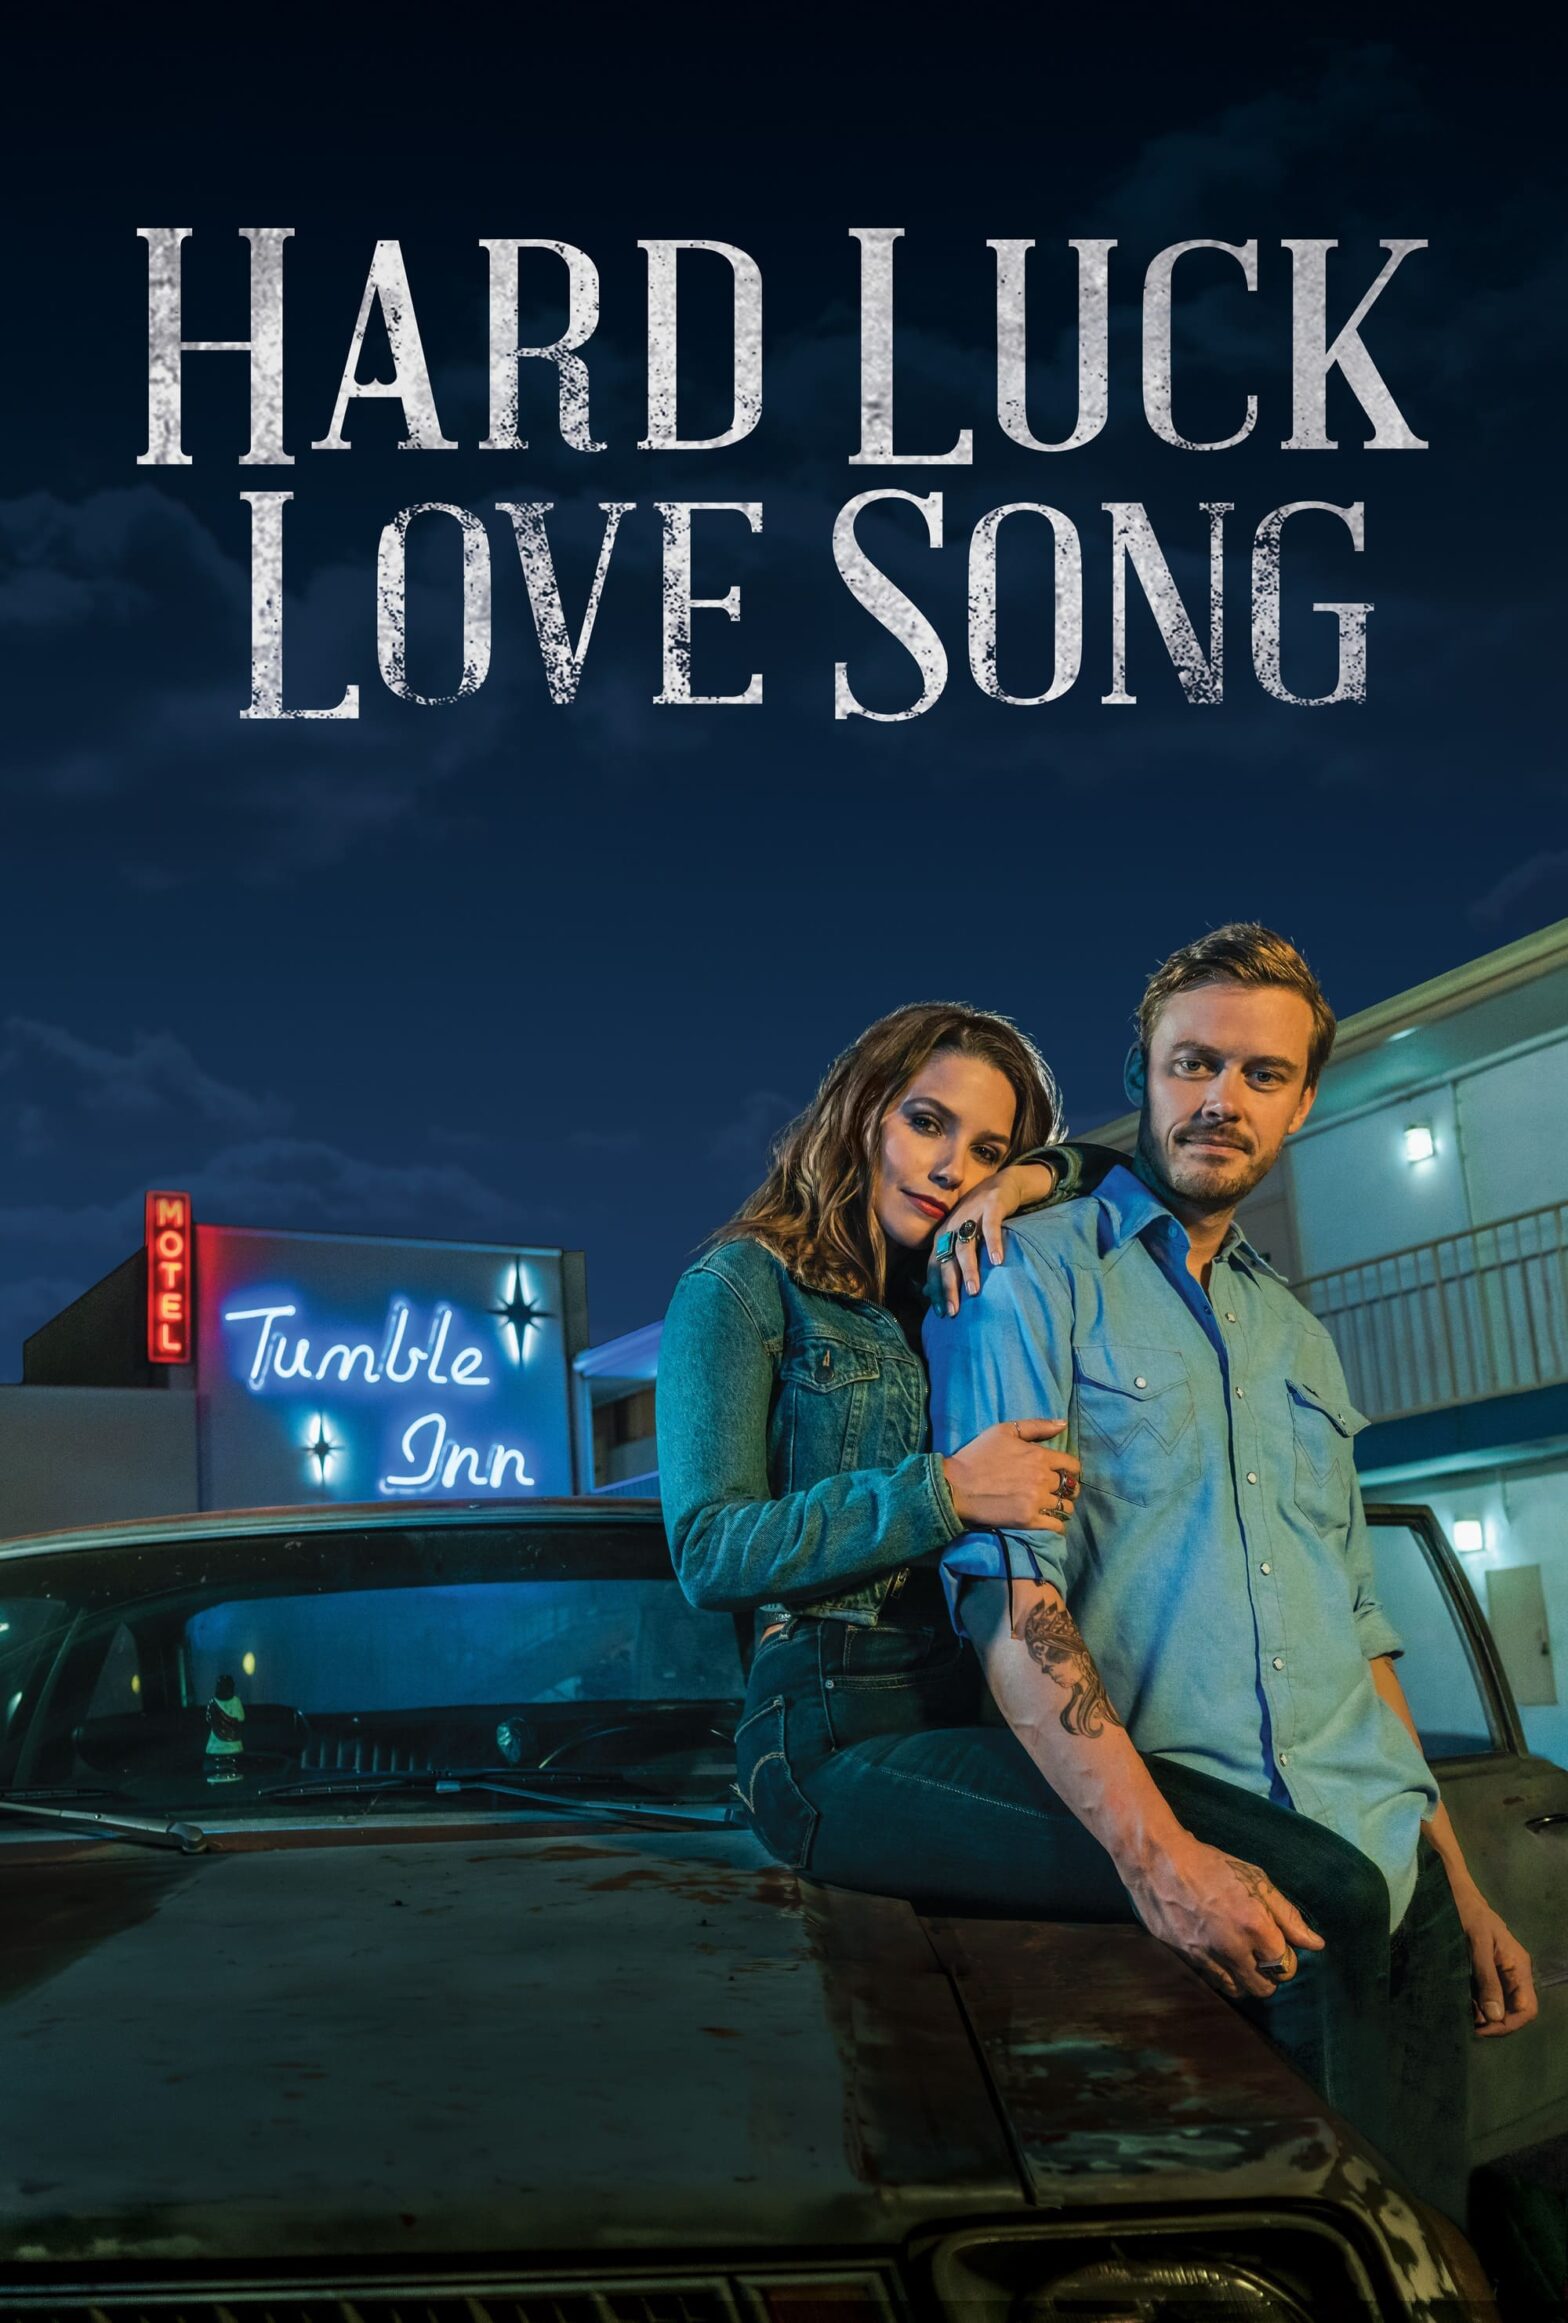 Poster for the movie "Hard Luck Love Song"